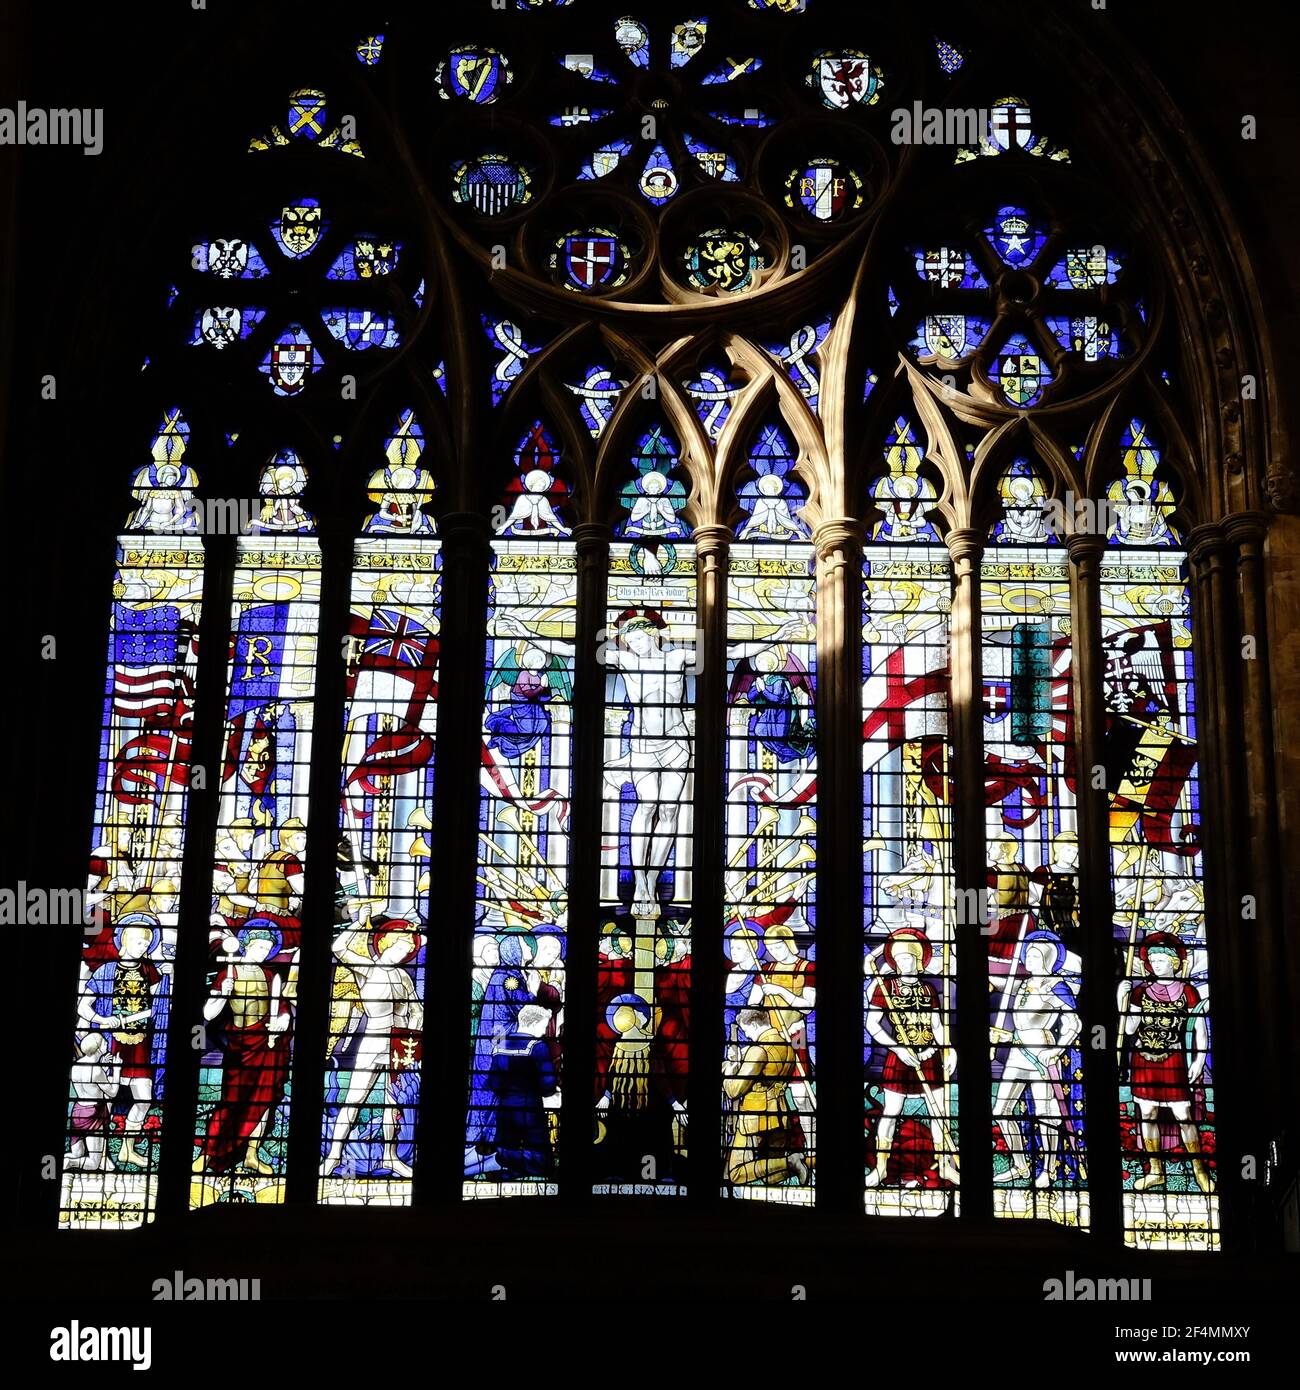 CHESTER, UNITED KINGDOM - Mar 17, 2021: Stained glass window situated above the main west entrance to St. Albans Cathedral in St. Albans, UK. Stock Photo